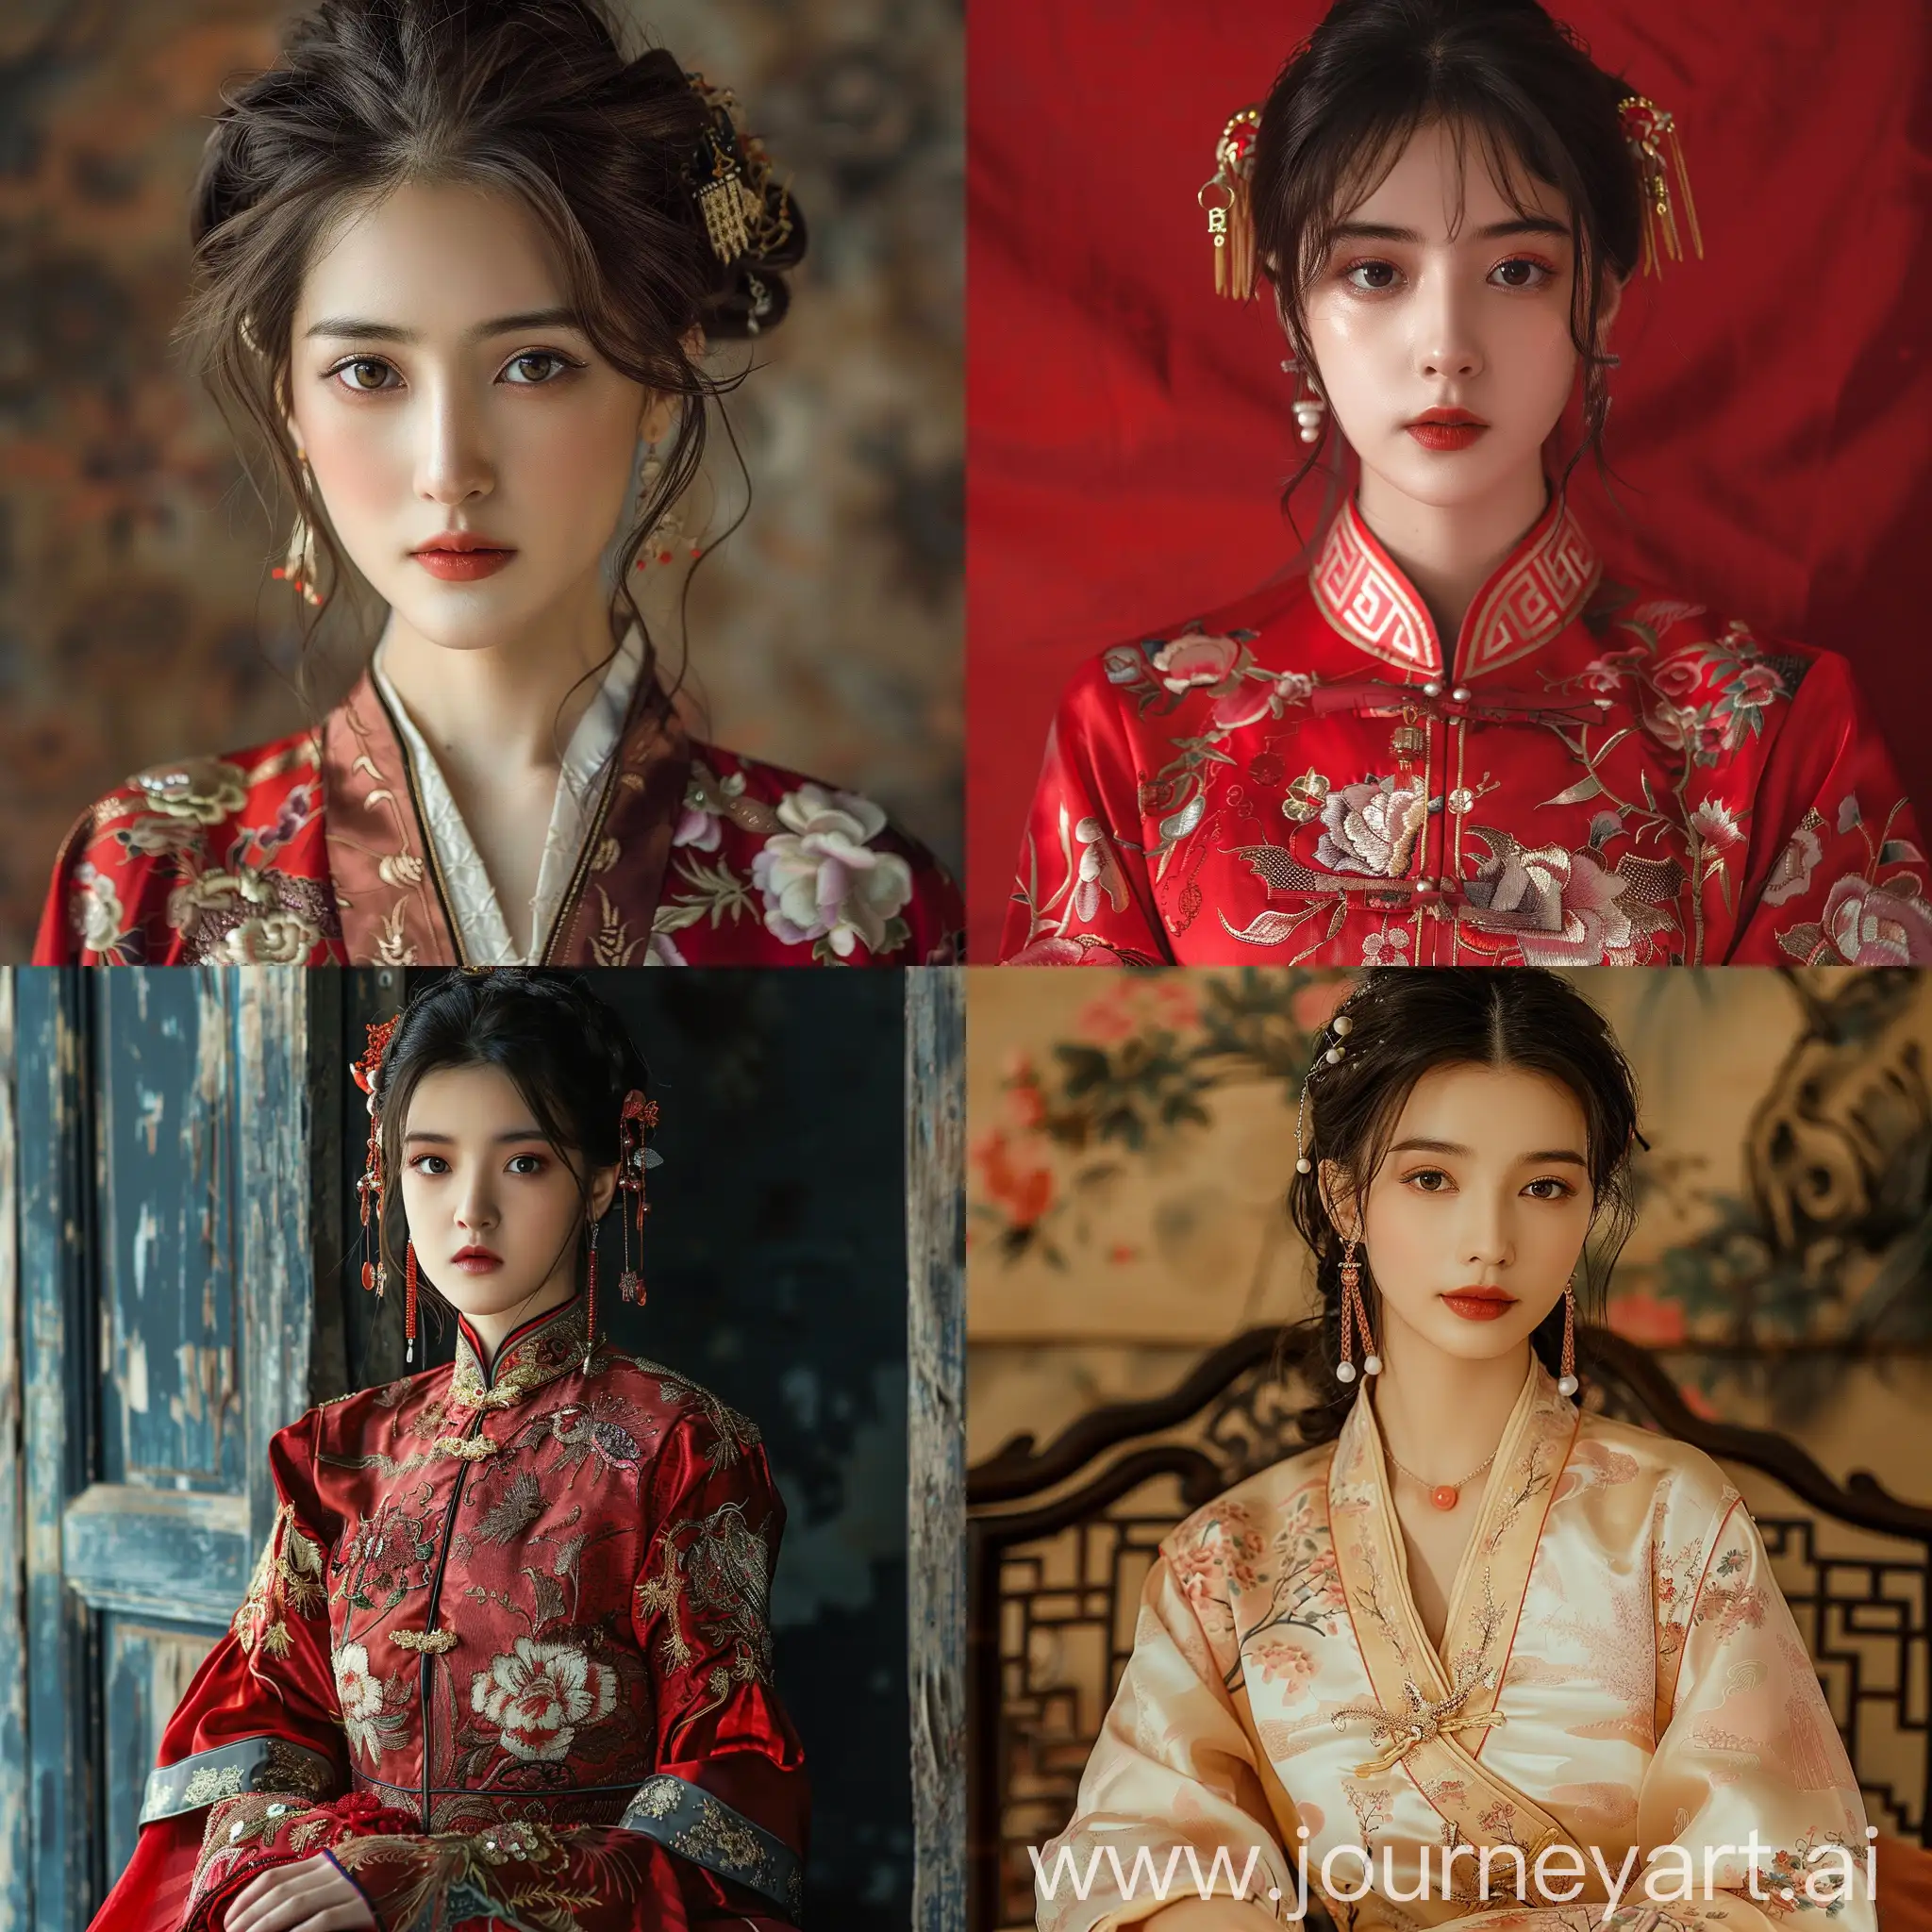 New-Chinese-Style-Female-Models-in-Manchu-Attire